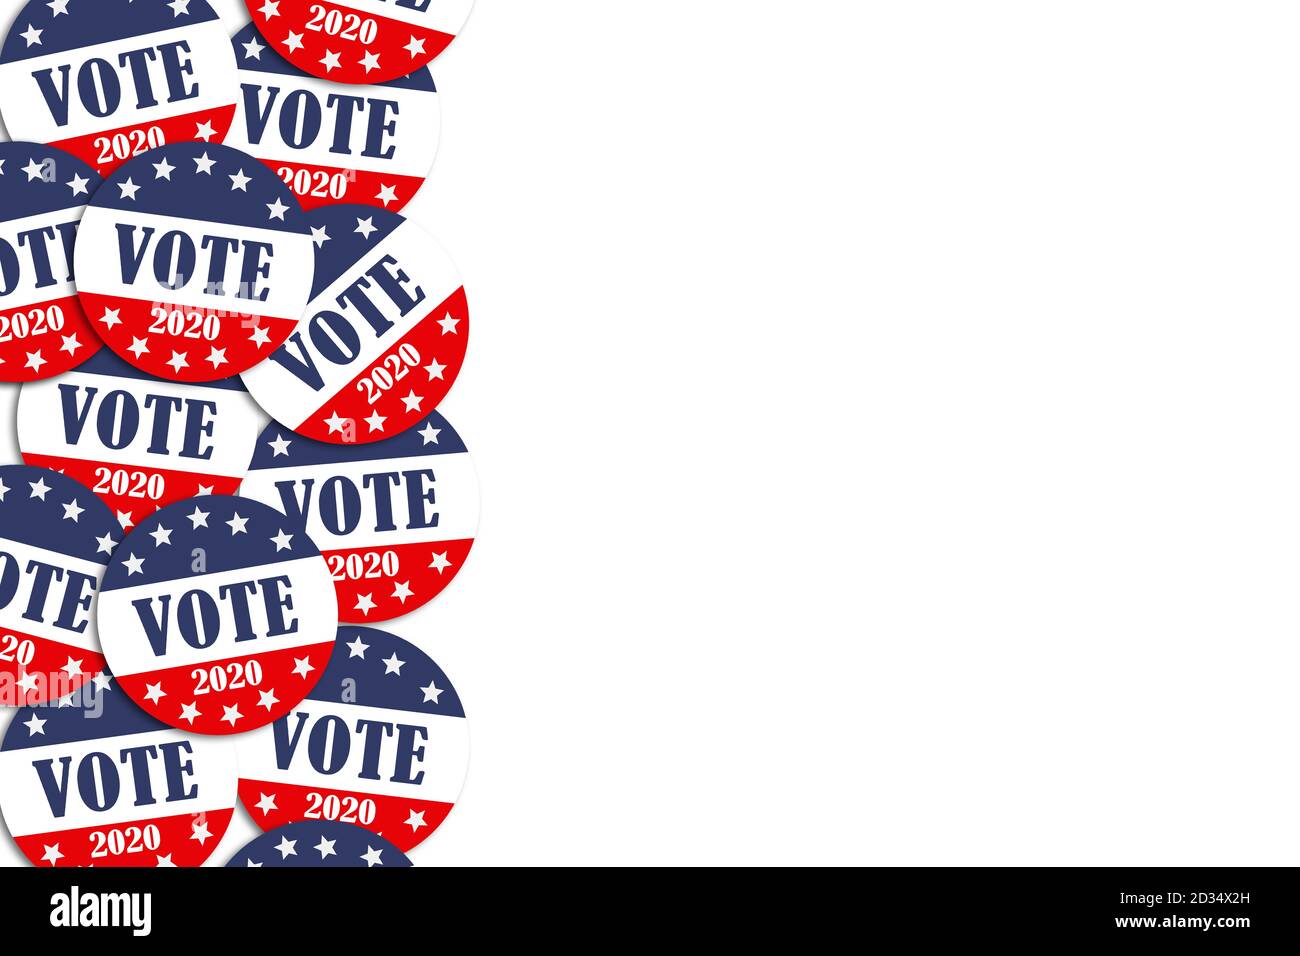 Presidential election 2020 in the United States. Icon for voting in elections. Presidential elections in the United States of America. Voting buttons Stock Photo